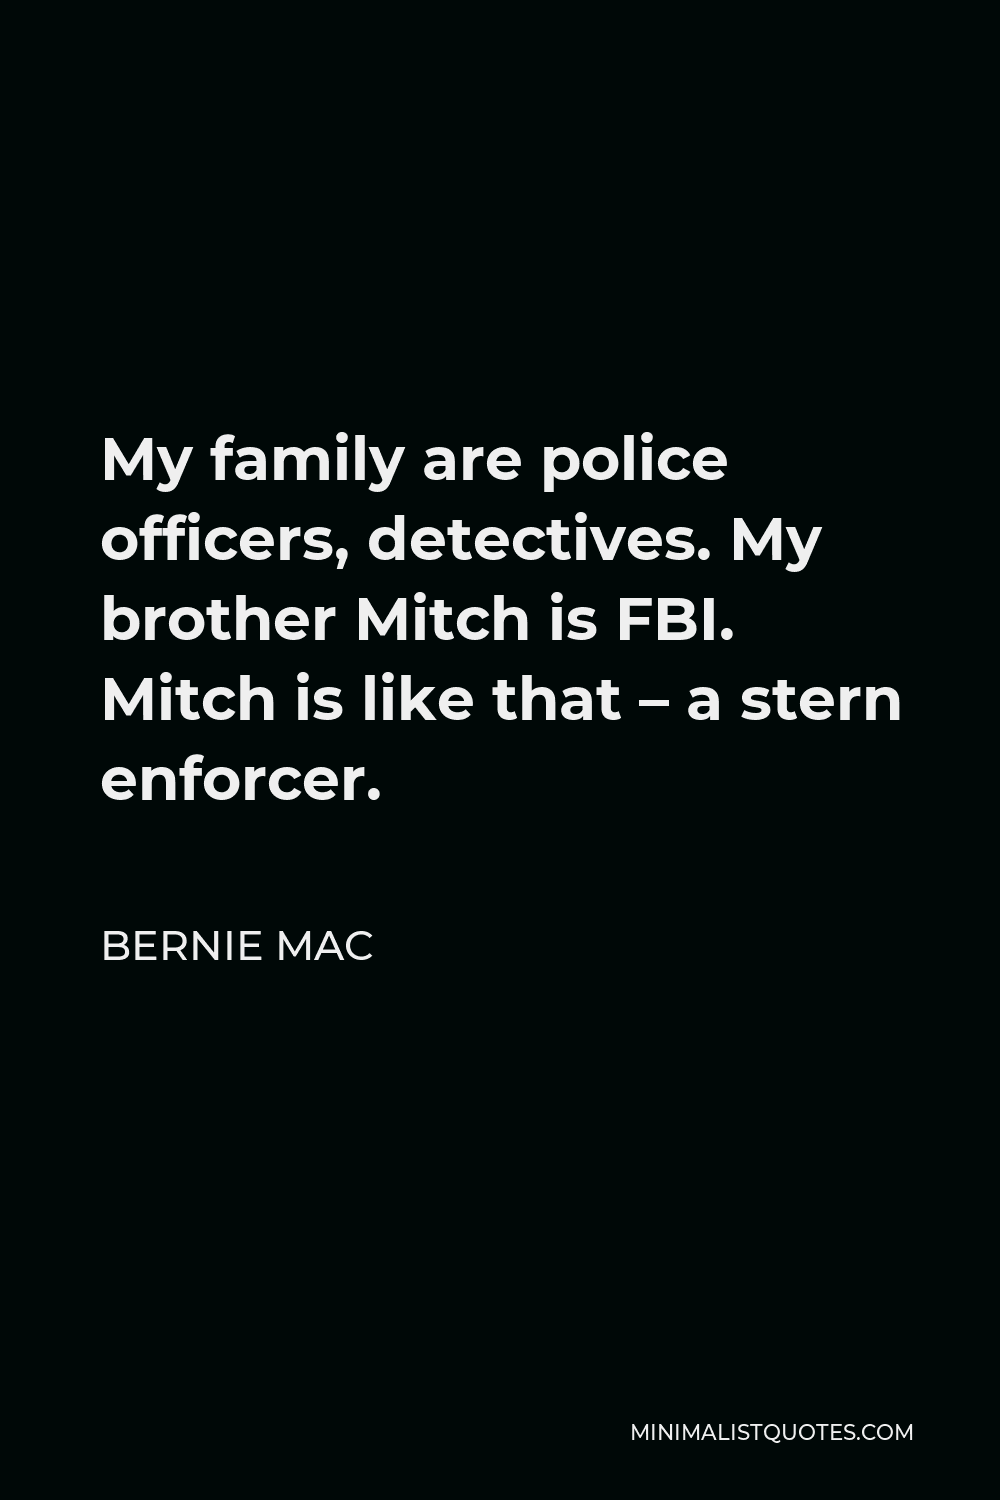 Bernie Mac Quote - My family are police officers, detectives. My brother Mitch is FBI. Mitch is like that – a stern enforcer.